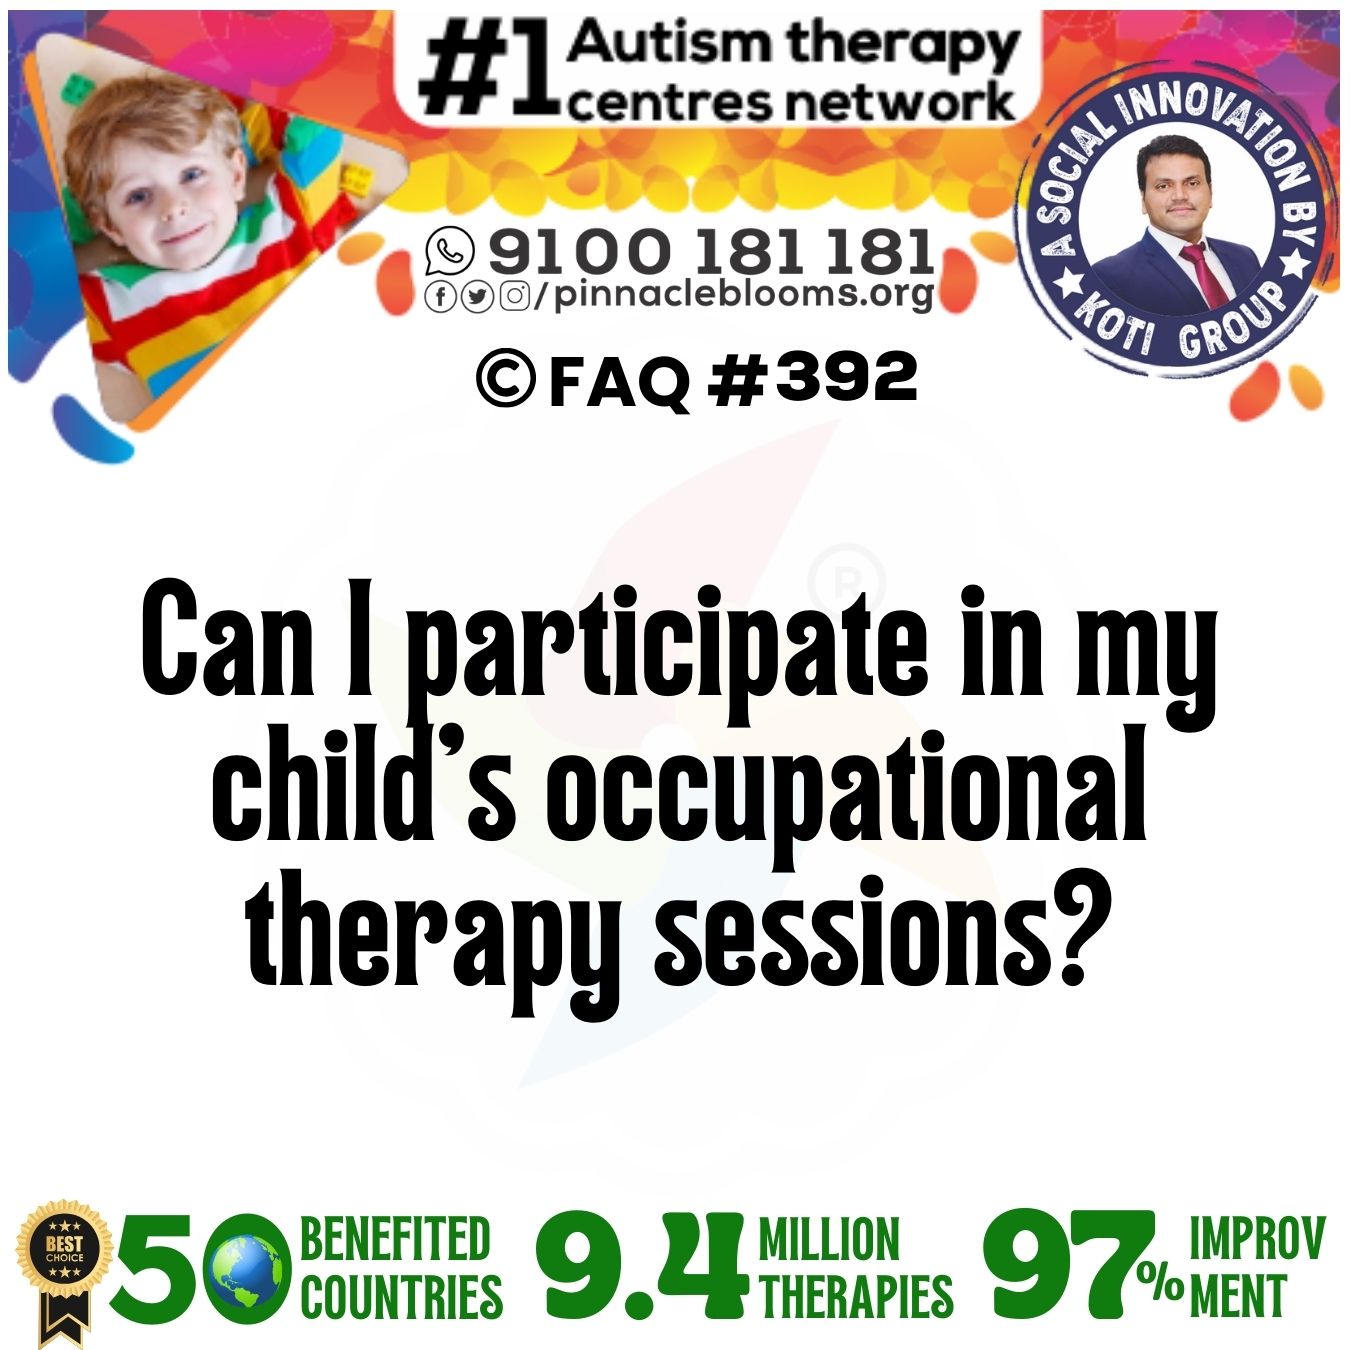 Can I participate in my child's occupational therapy sessions?